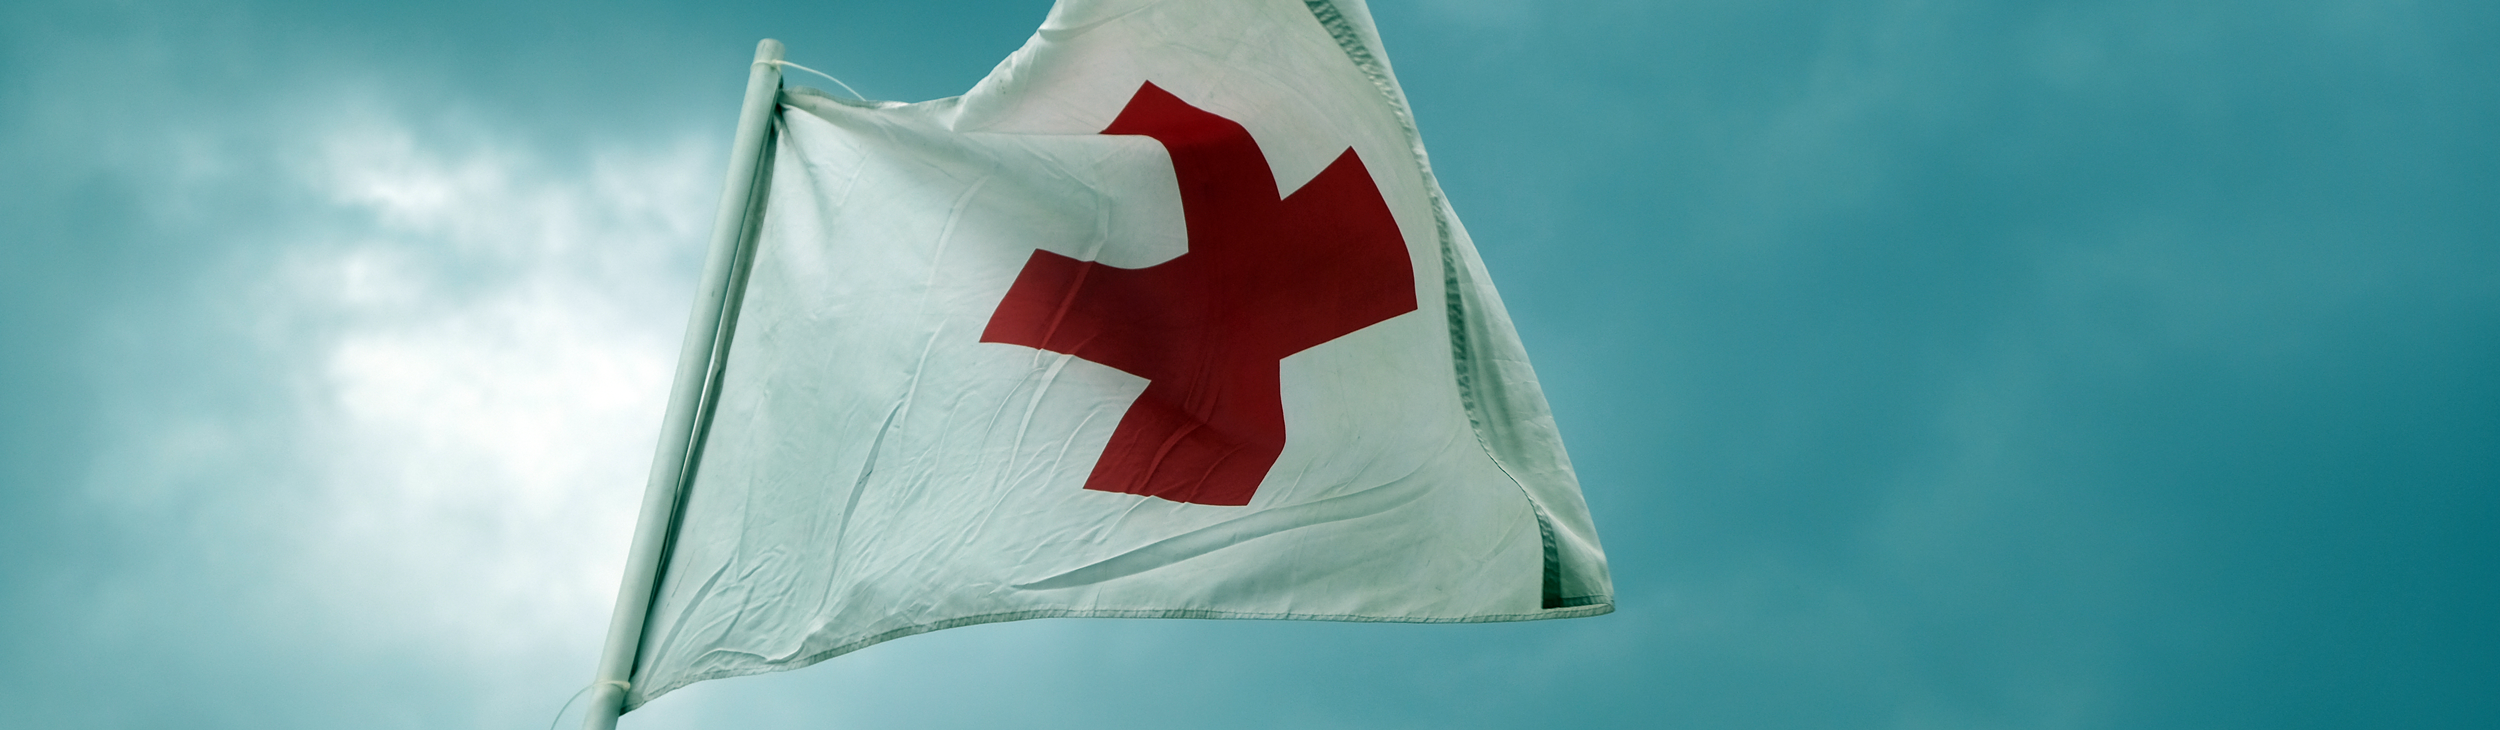 Image of white first aid flag with Red Cross logo, against a cloudy blue sky